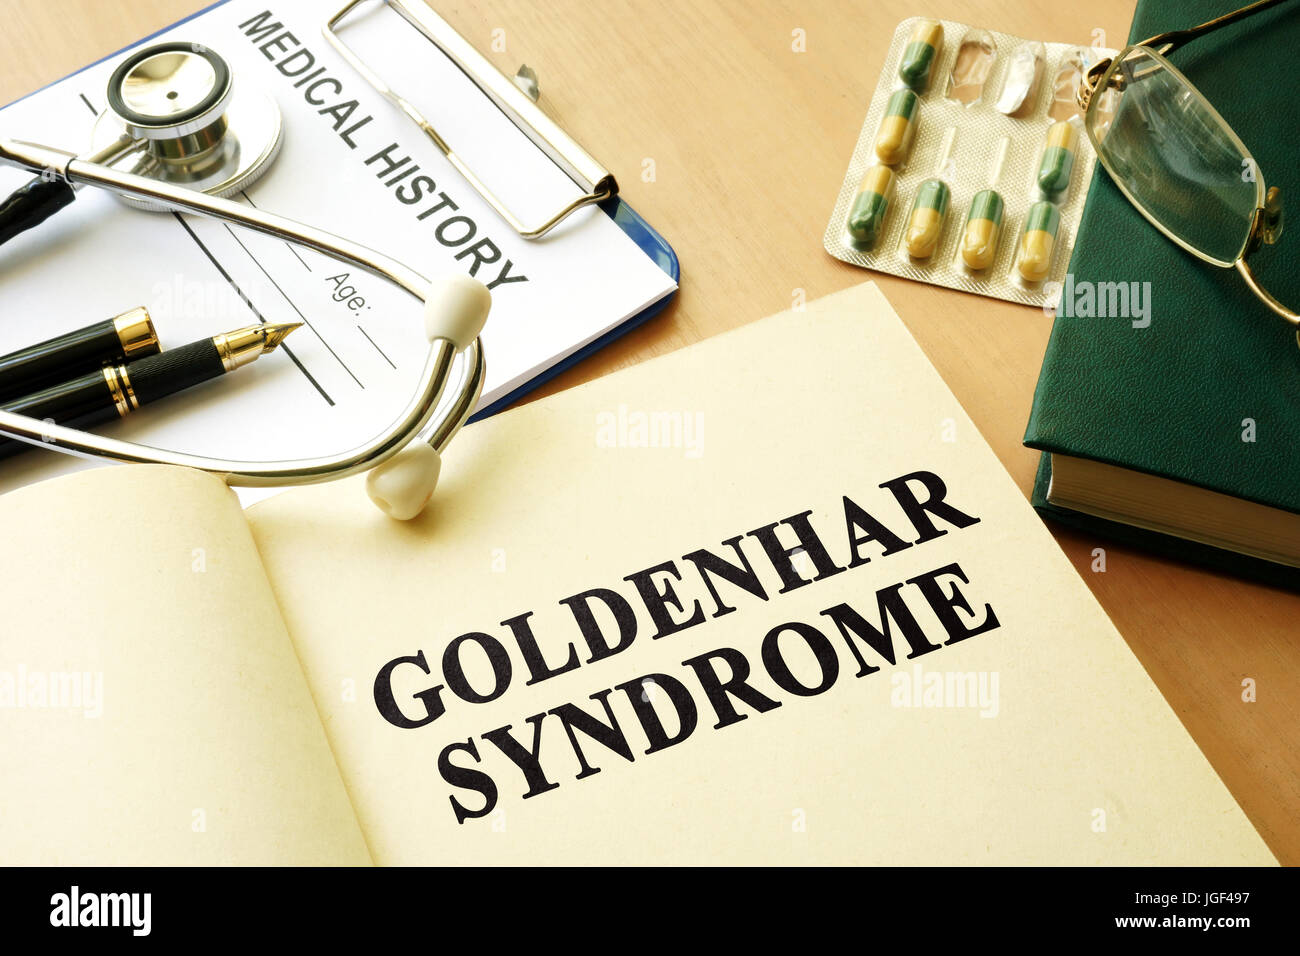 Book with title Goldenhar Syndrome on a table. Stock Photo